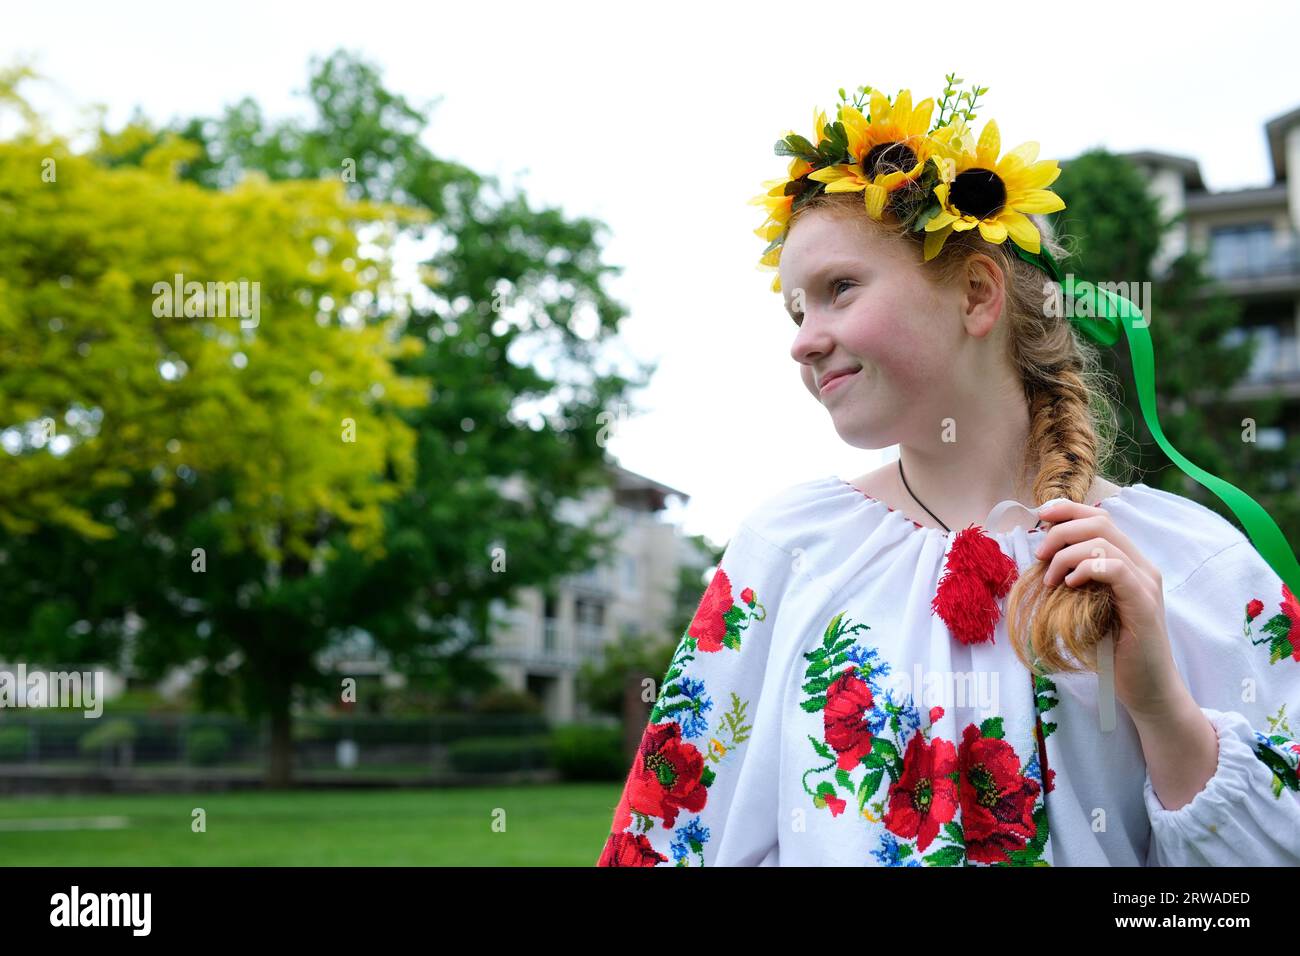 beautiful red-haired Ukrainian girl in an embroidered blouse flowers red poppies on a white shirt sunflowers wreath in her hair ribbons nature frequency virgin beauty strength. Victory joy peace Stock Photo